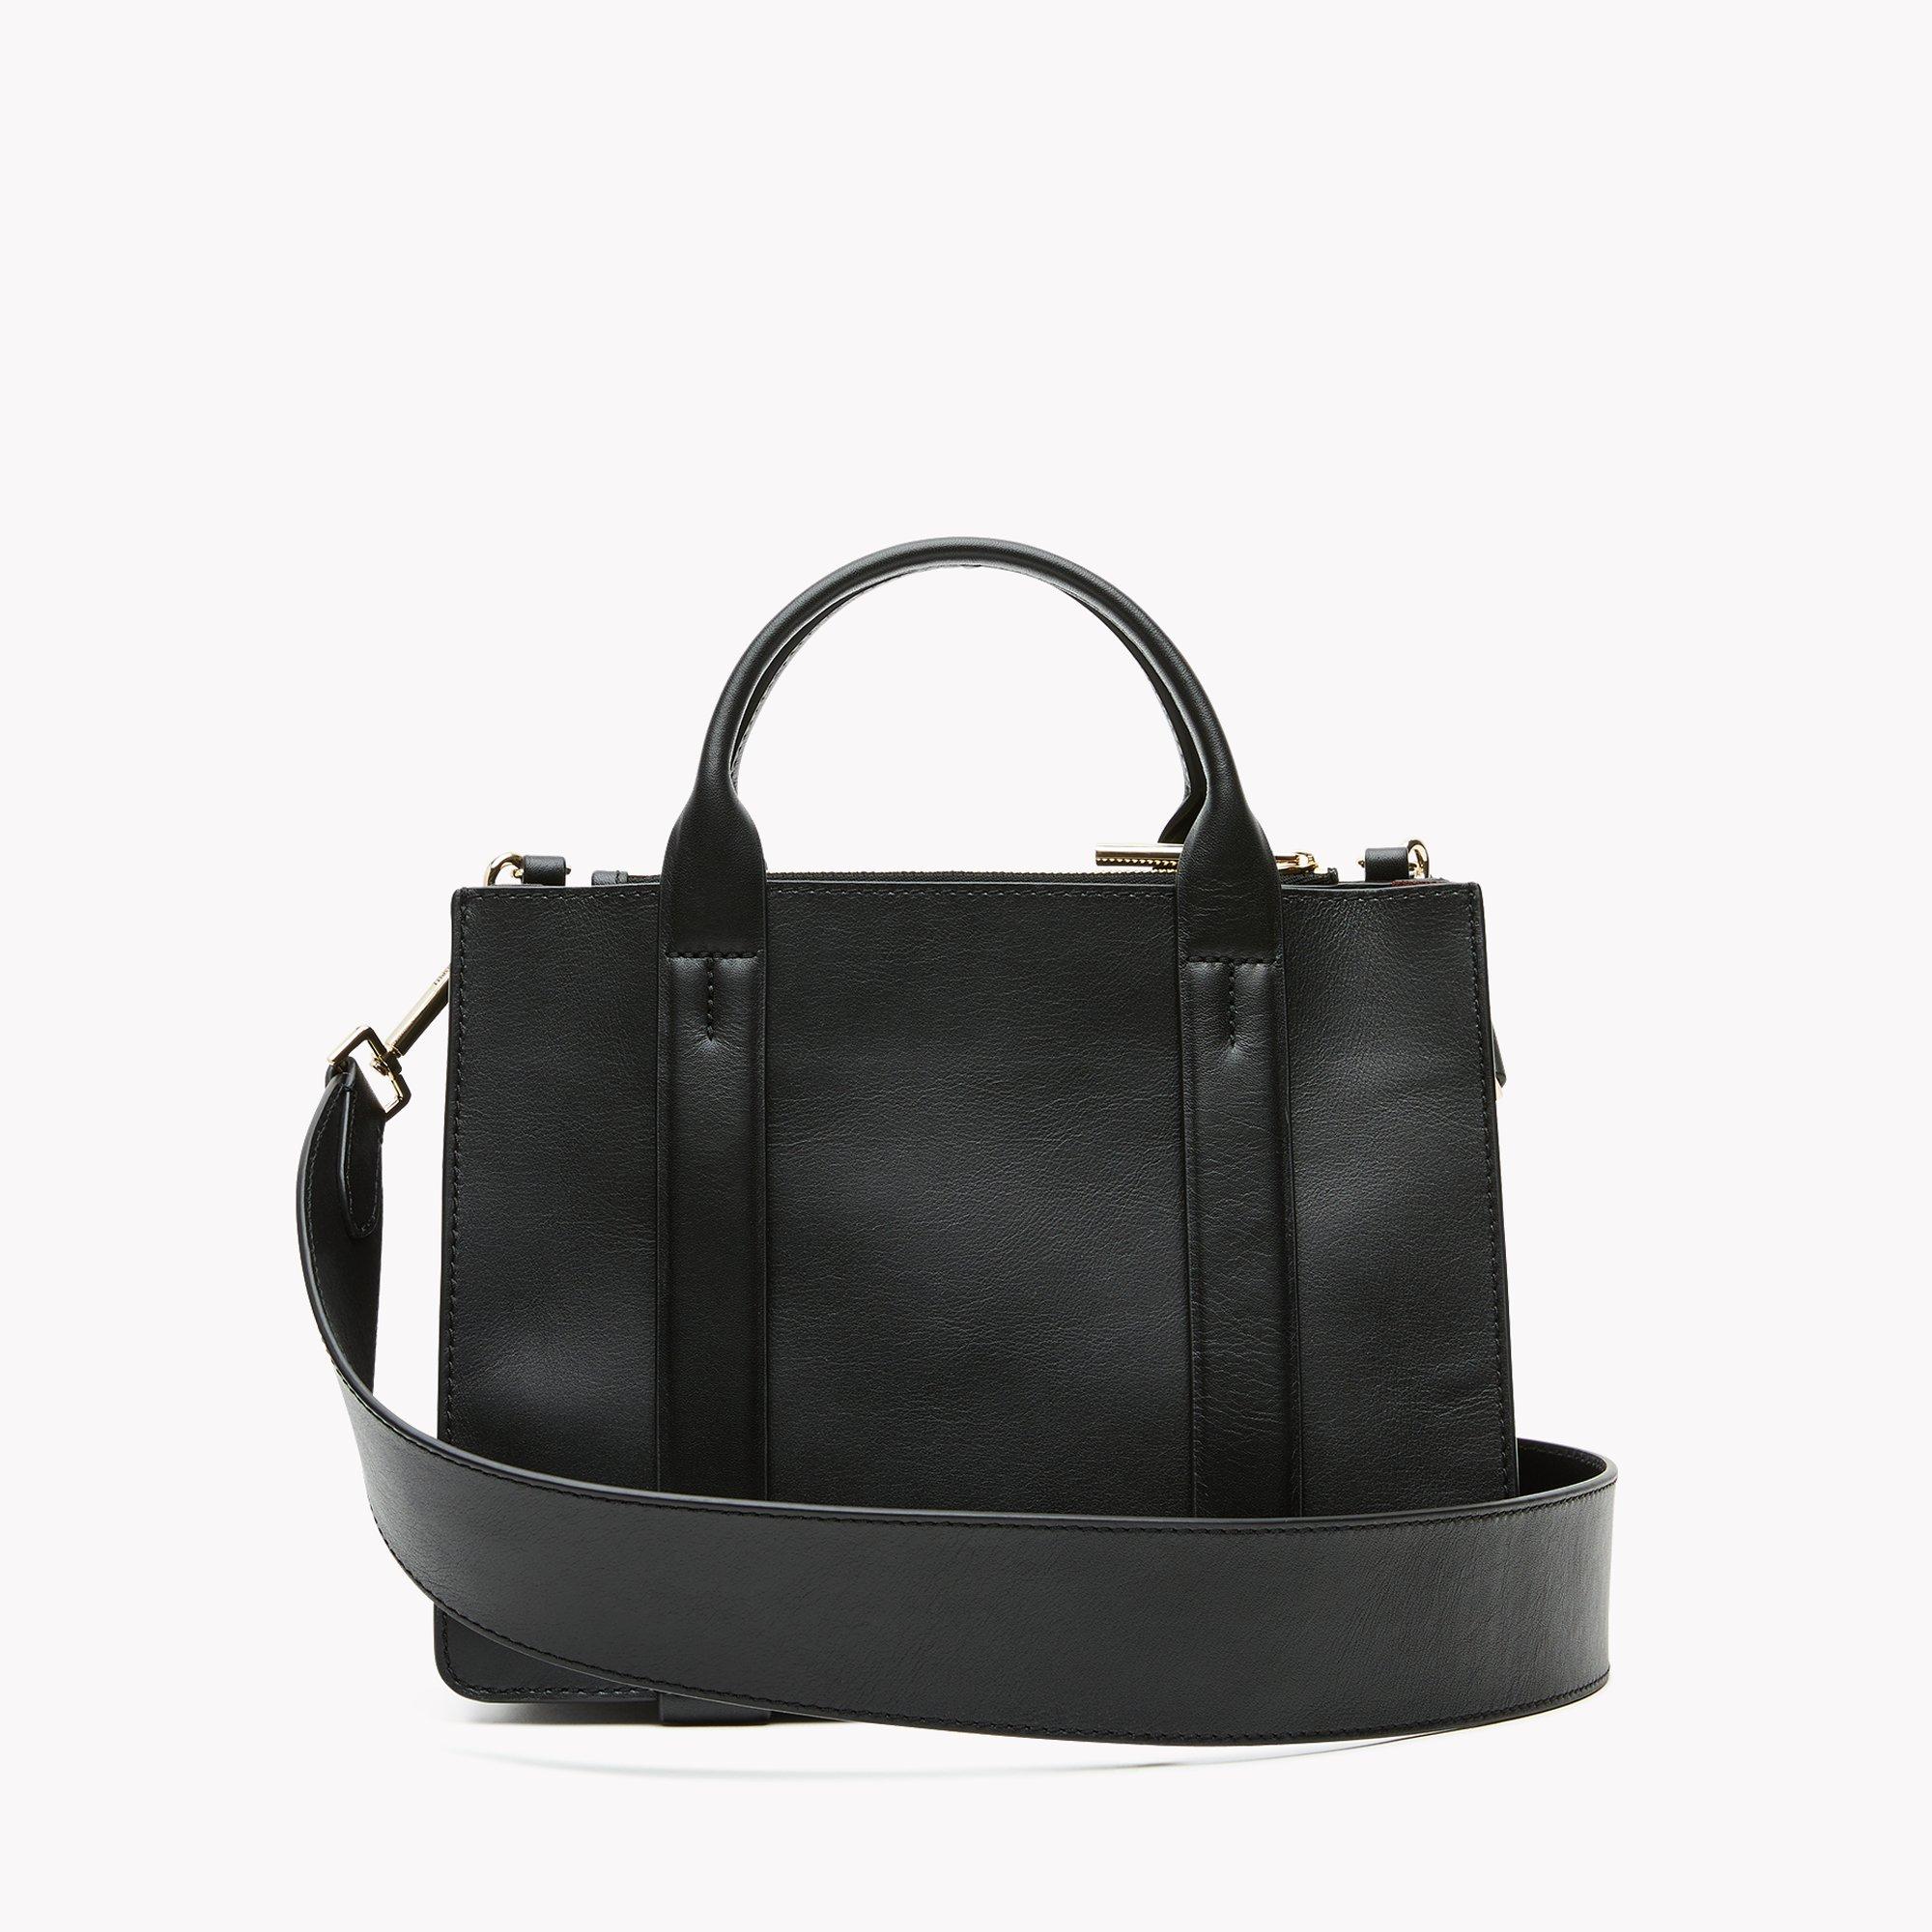 West Mini Satchel Bag in Leather